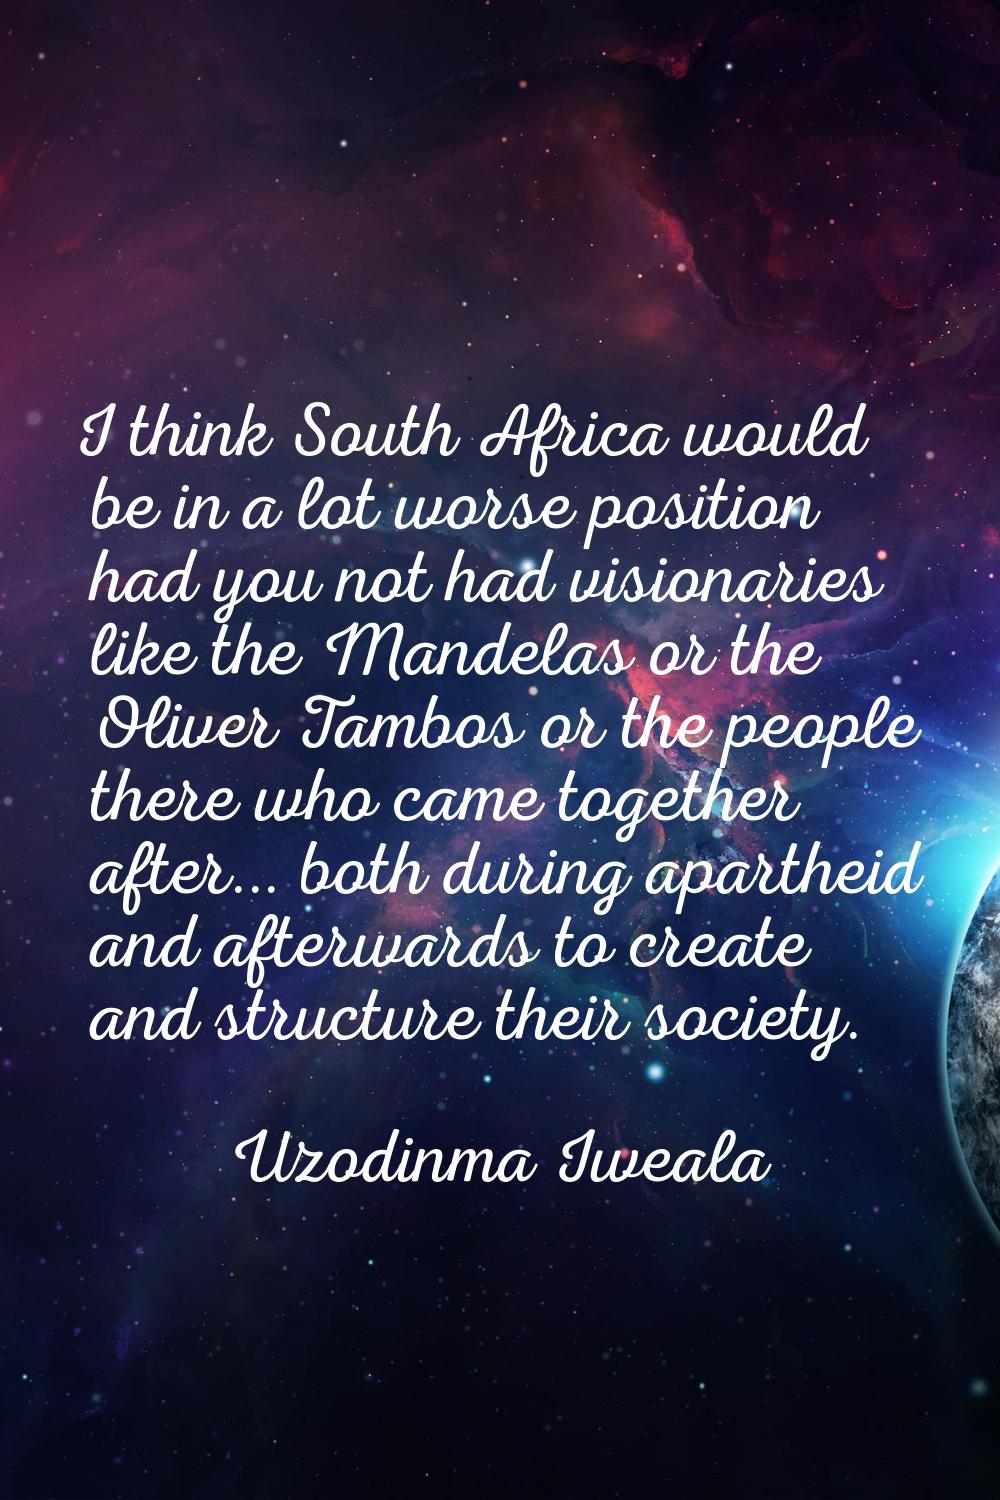 I think South Africa would be in a lot worse position had you not had visionaries like the Mandelas